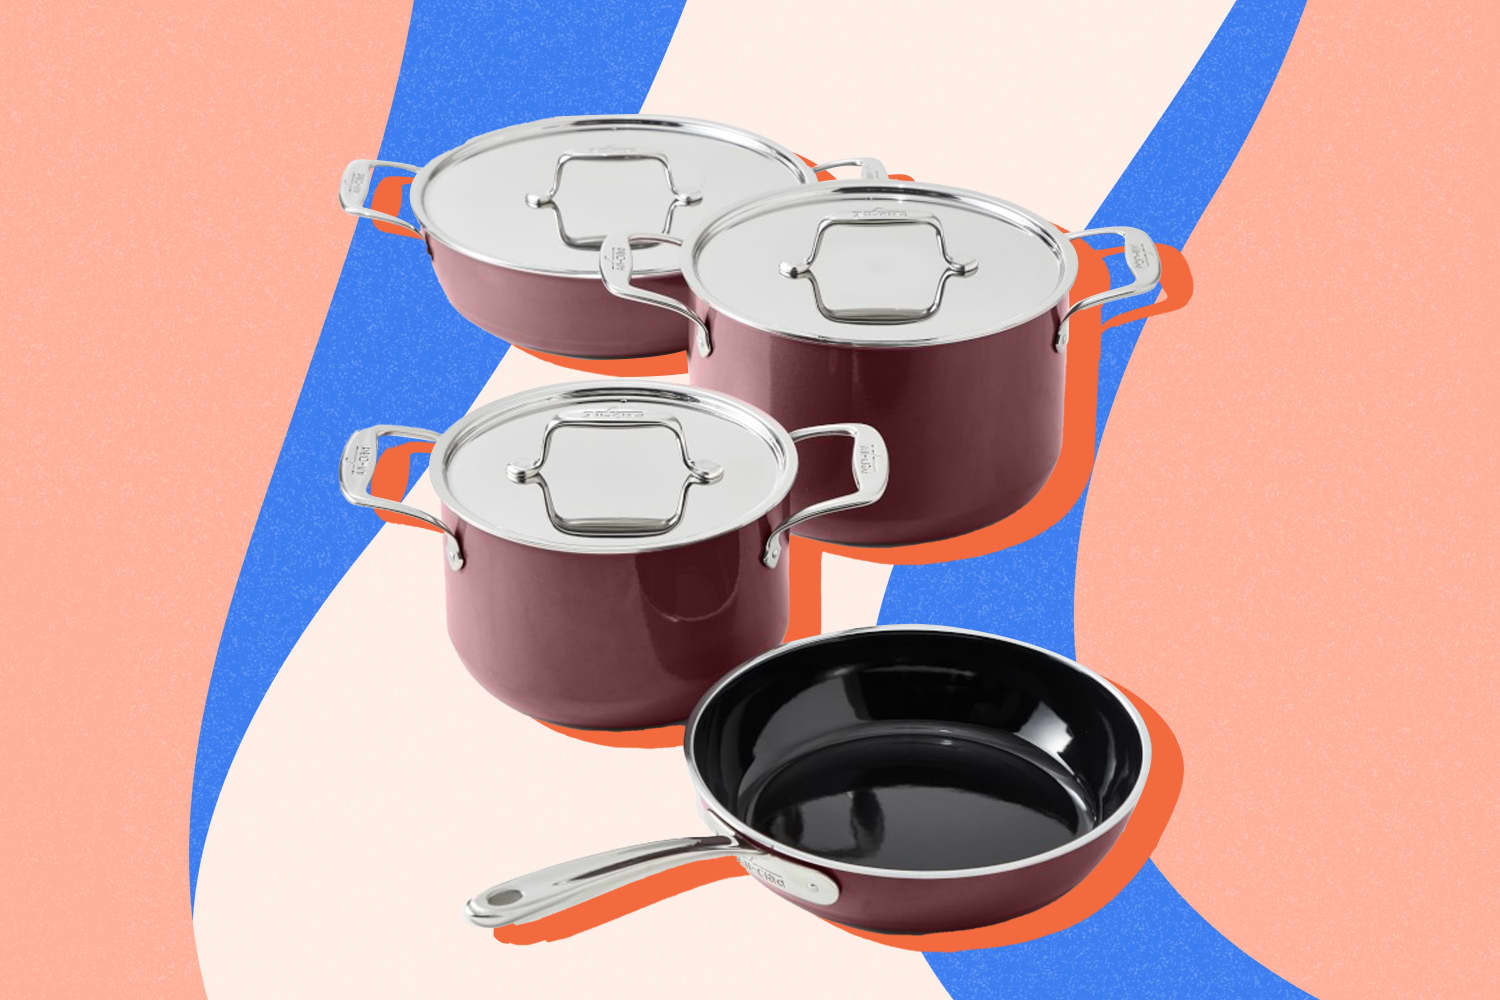 Lowest price on the web! Just $180 for this cast iron, enamel-coated  cookware set